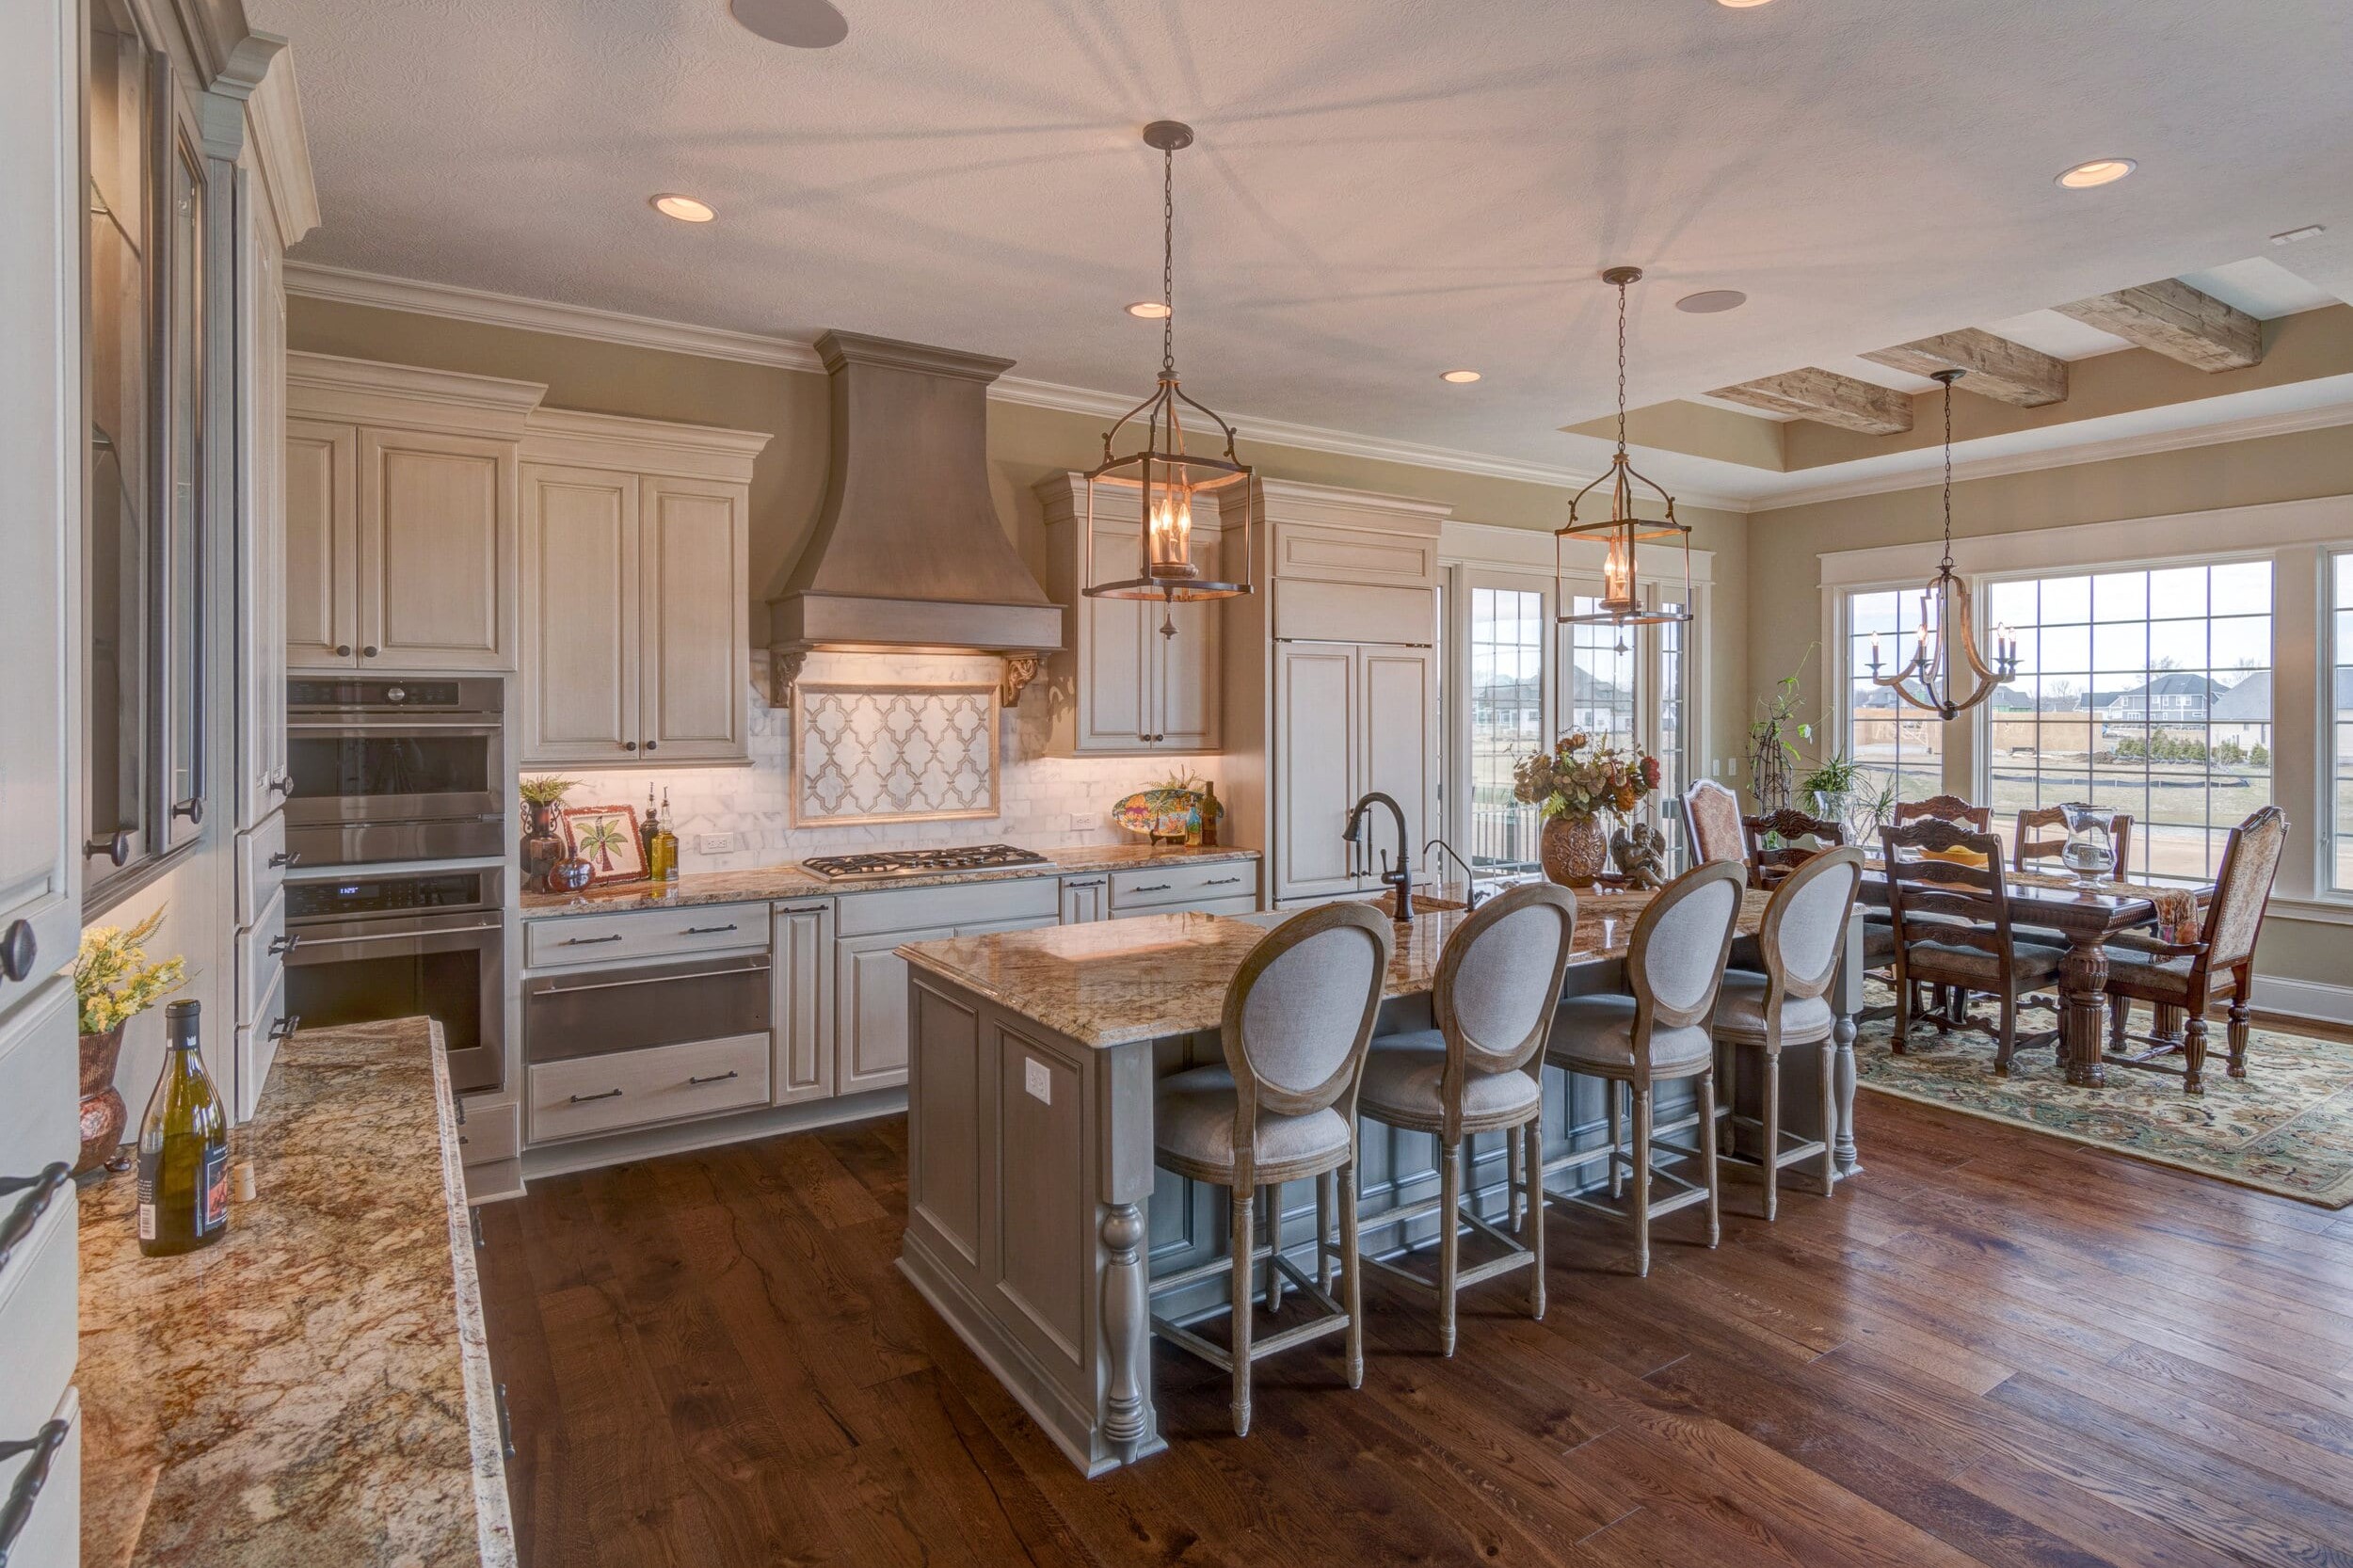 A large kitchen with hardwood floors and a center island is an attractive feature when considering new homes in the Custom Homes Westfield Indiana or Fishers Indiana areas. Whether you are looking for a custom home builder